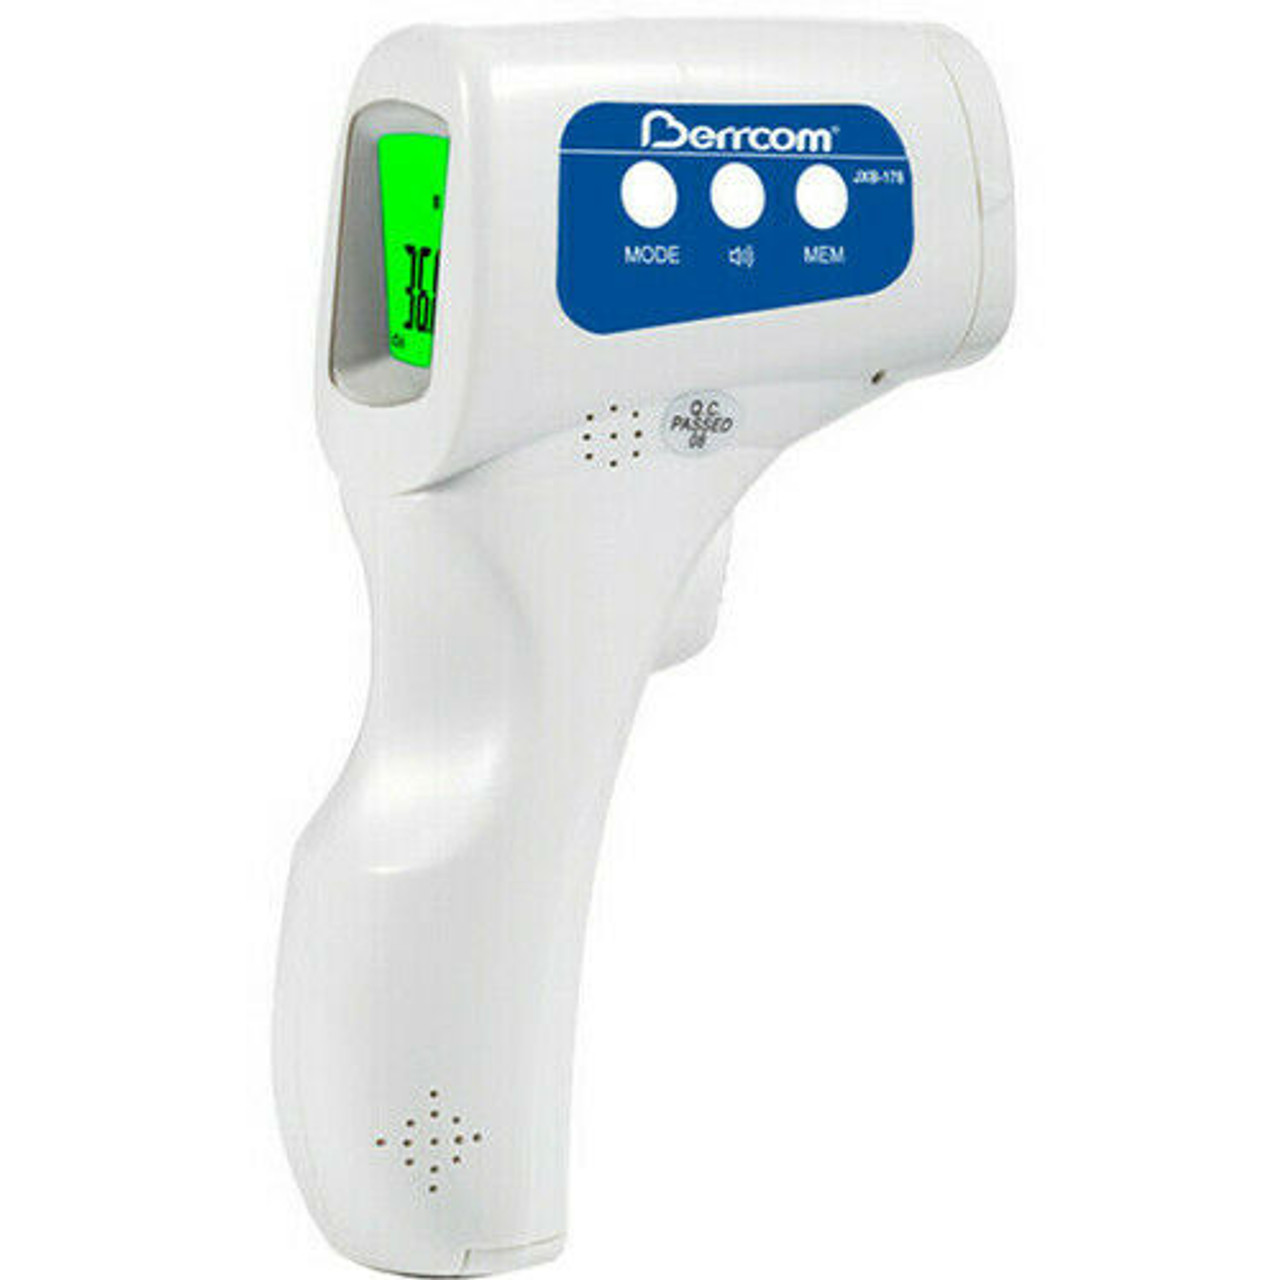  Infrared Thermometer, Non-Contact Digital Thermometer